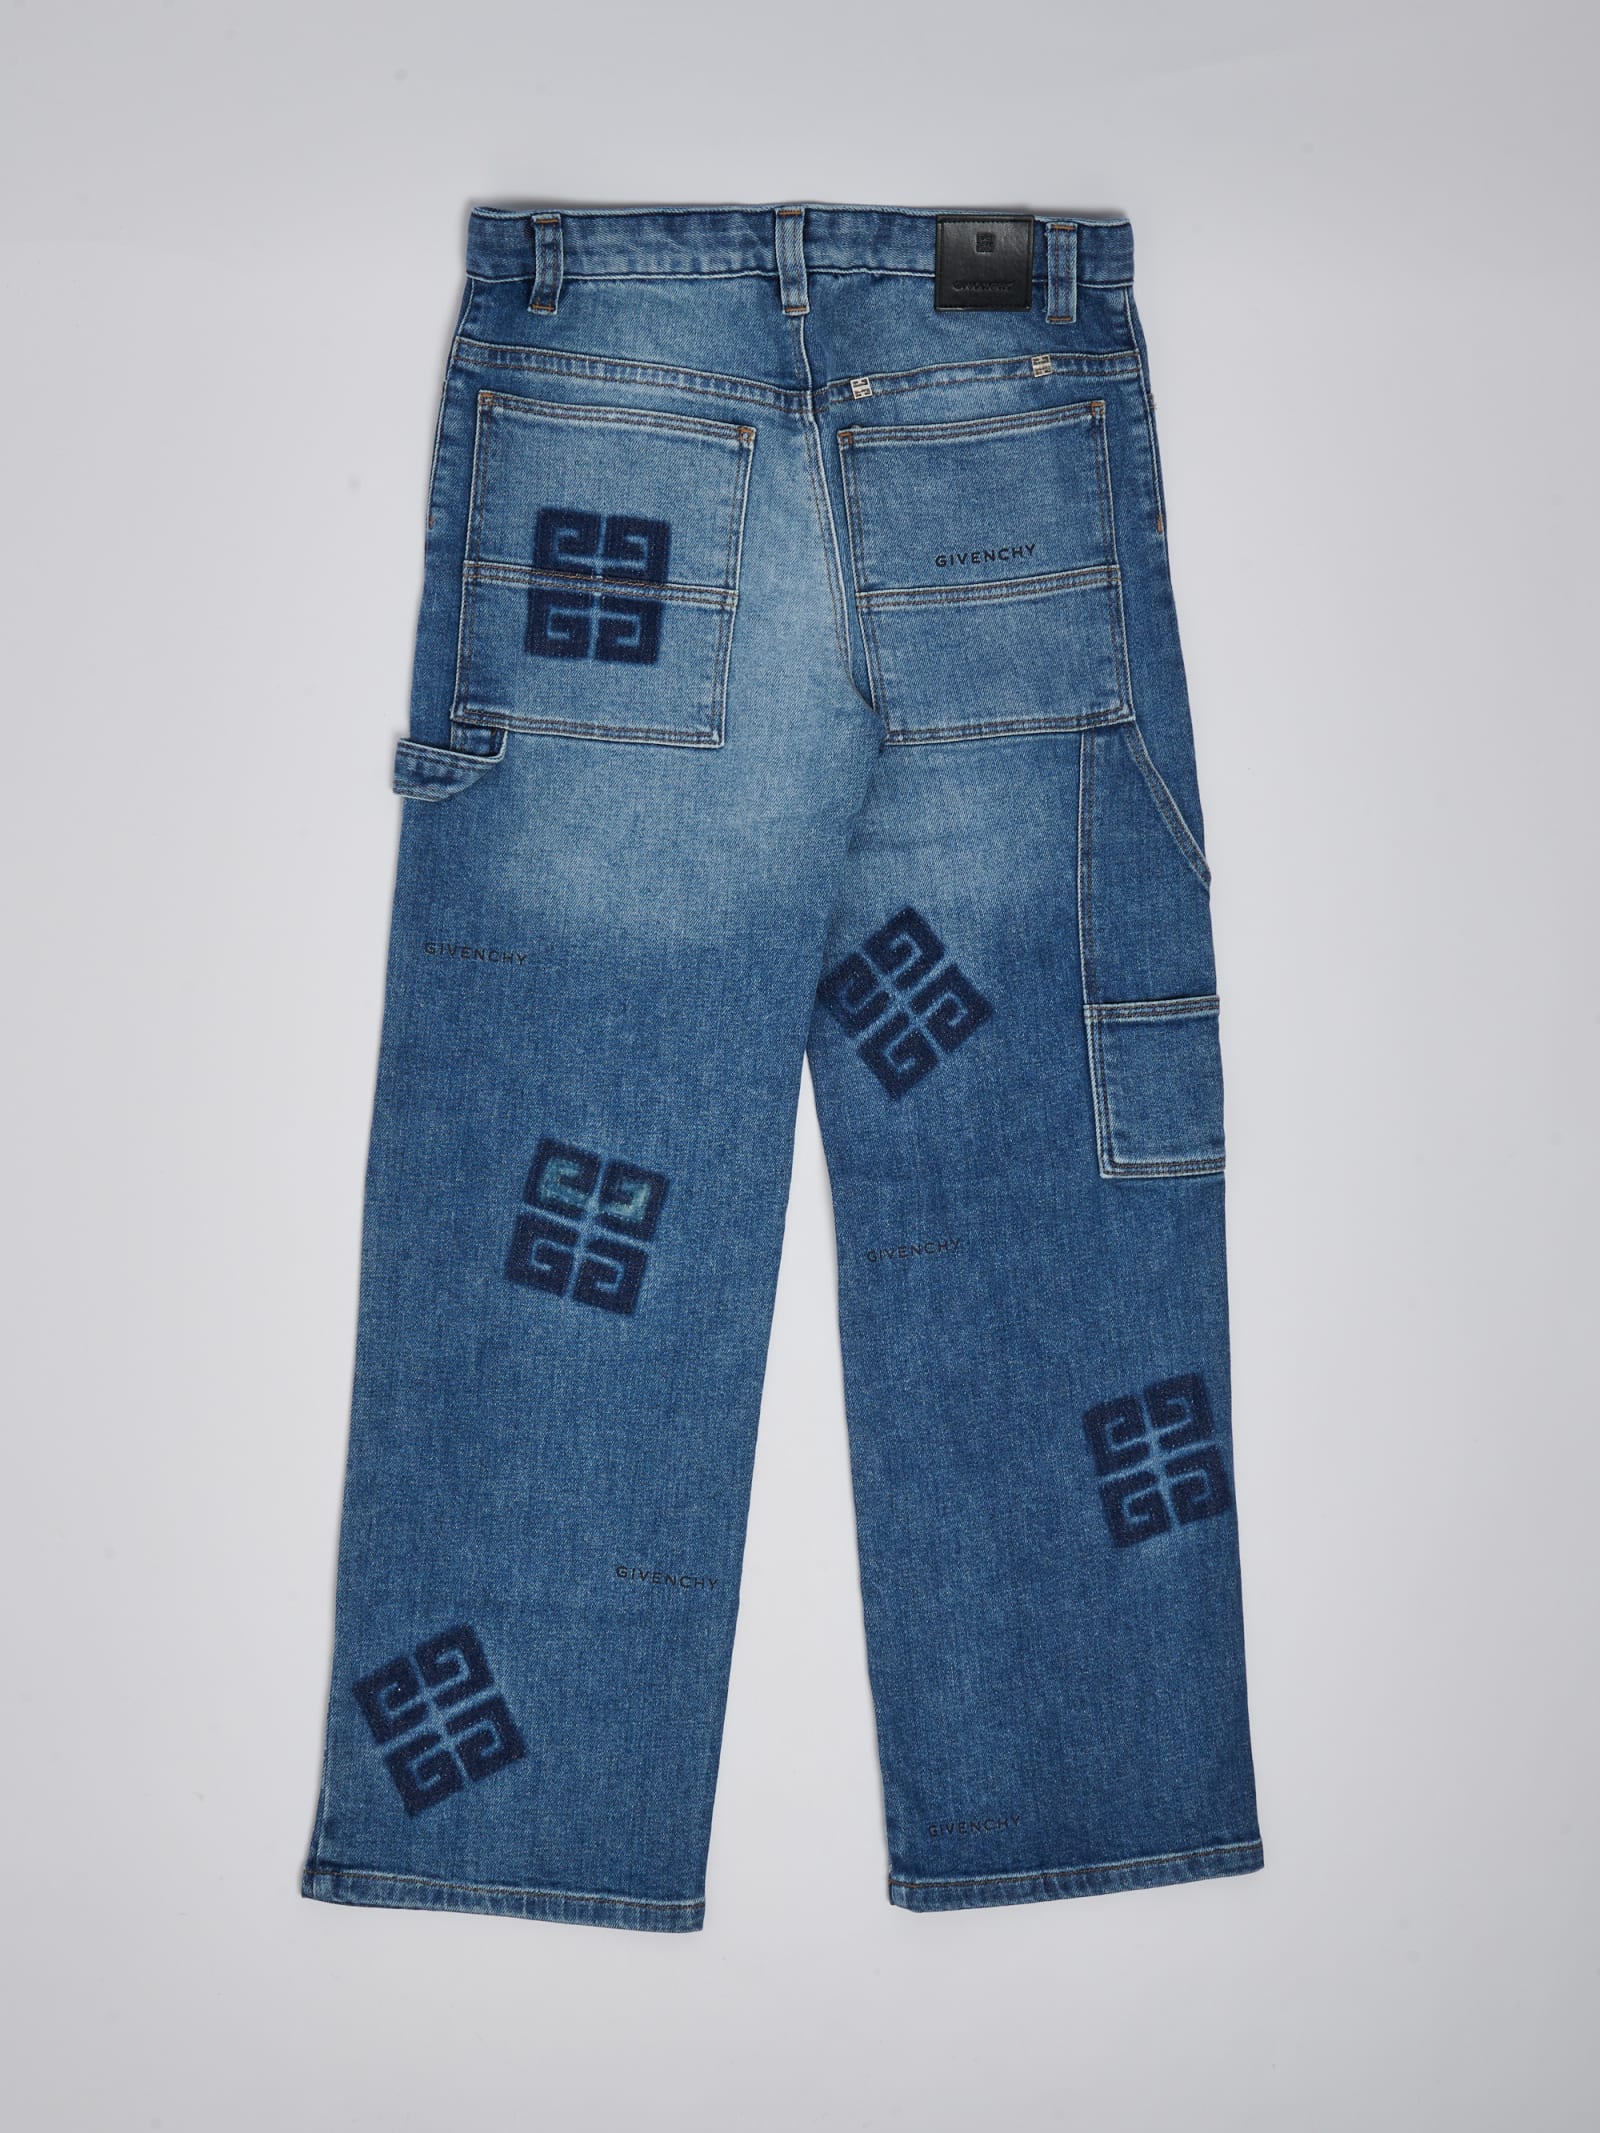 Shop Givenchy Jeans Jeans In Denim Medio